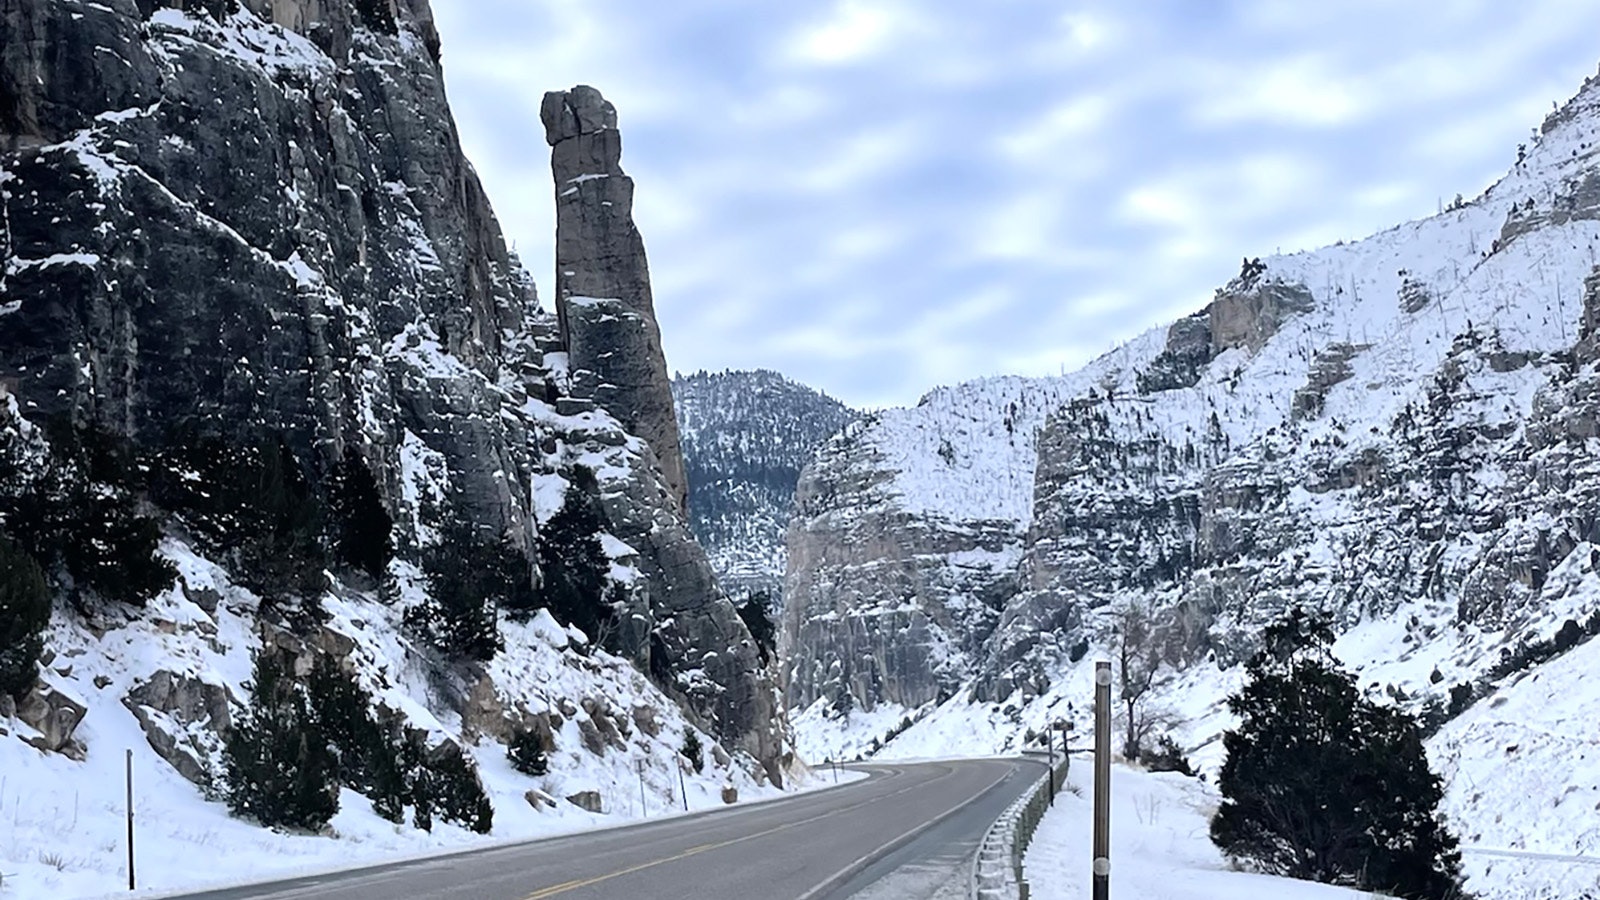 Chimney Rock along the Wind River Scenic Byway in winter.